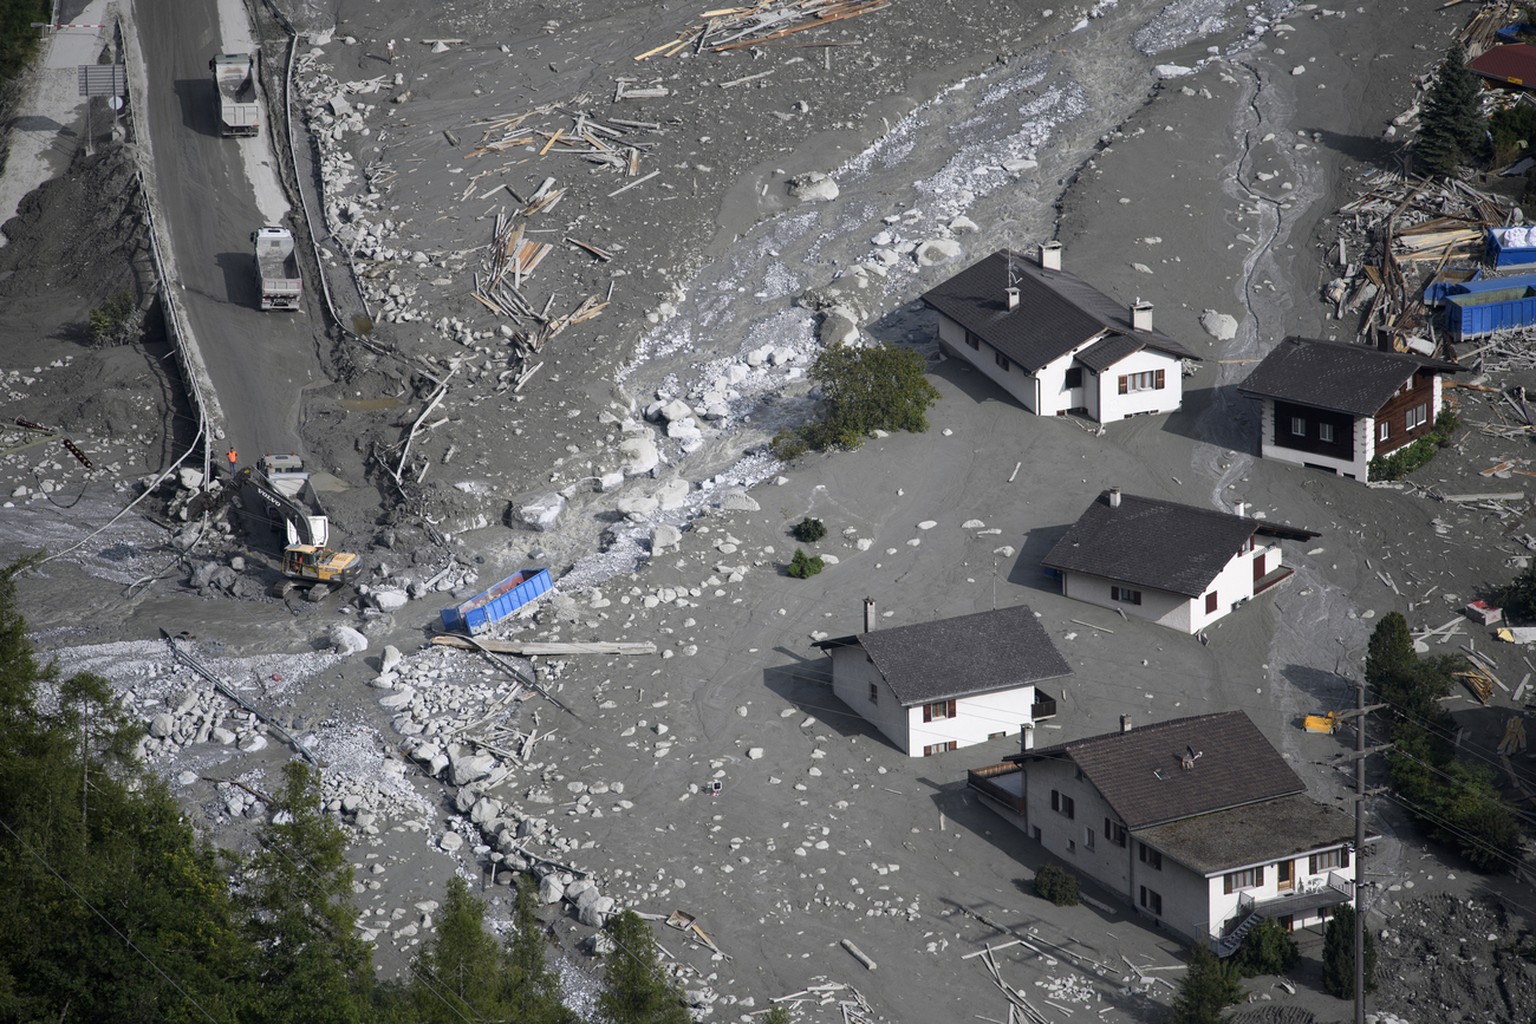 Search and rescue teams arrive, in the village Bondo in Graubuenden in South Switzerland, on Thursday, August 24, 2017. The village had been hit by a massive landslide yesterday. The main road between ...